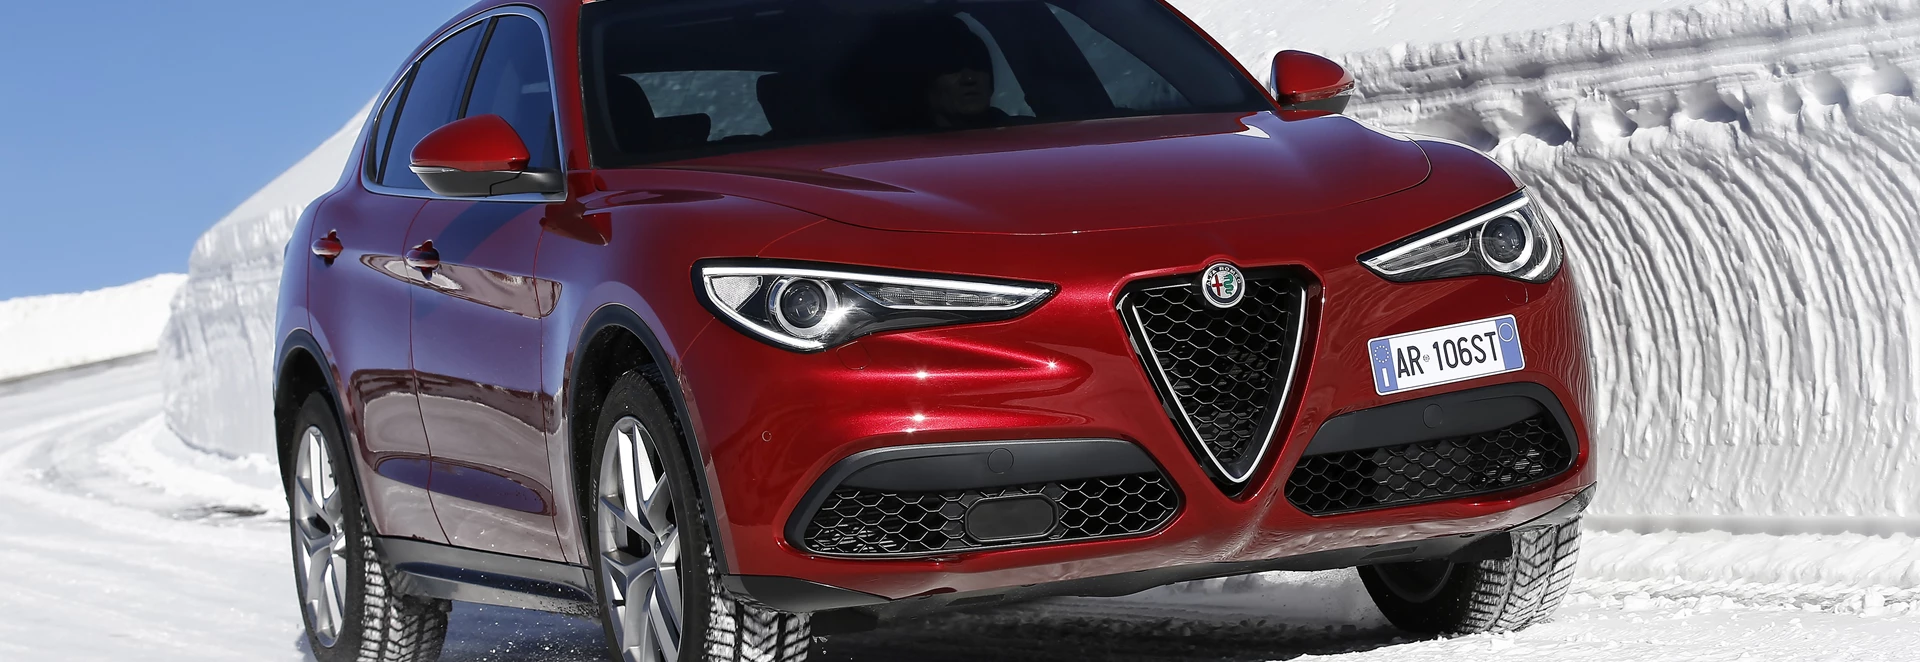 Alfa Romeo accidentally unveils new Stelvio SUV before you were meant to see it 